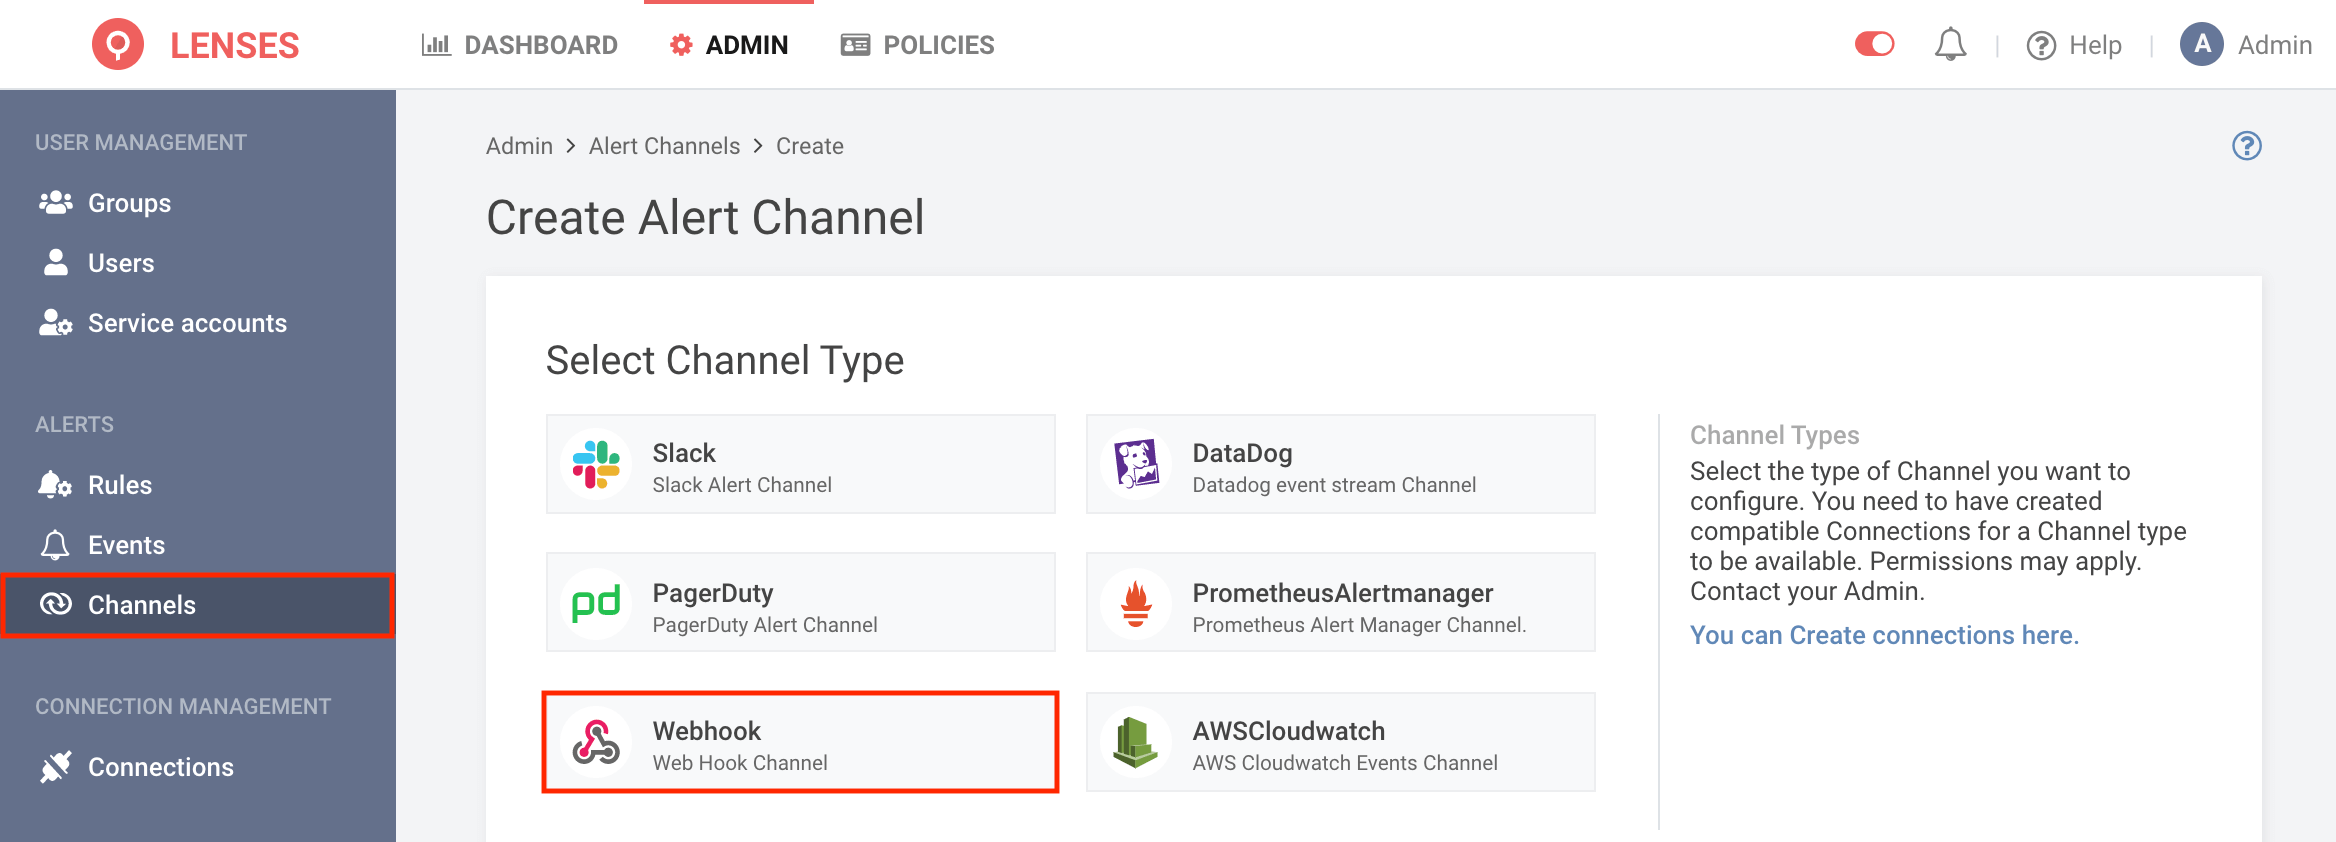 Webhook channel for Microsoft Teams